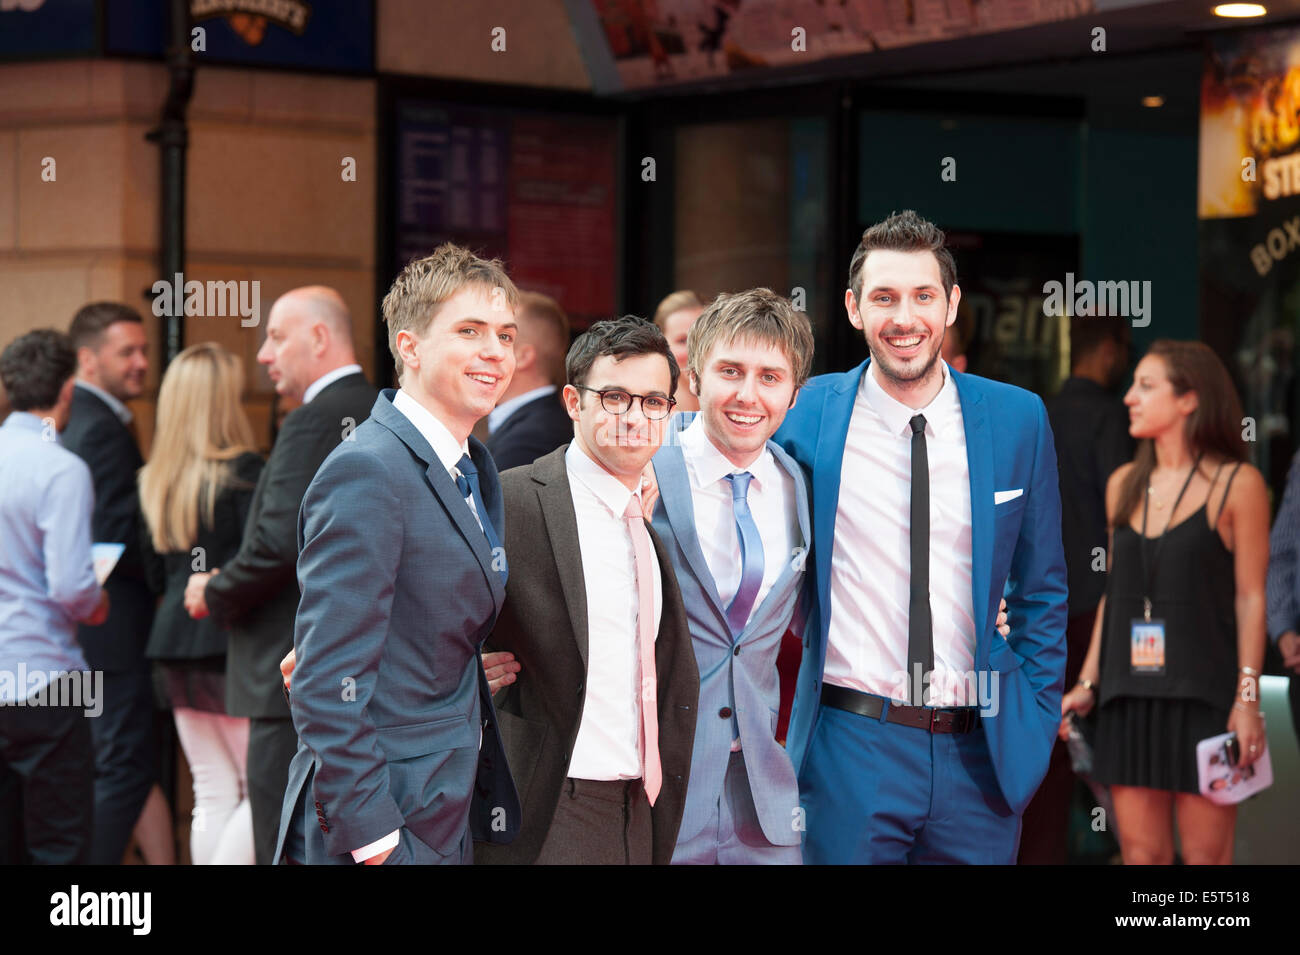 Leicester Square, London, UK. 5th August 2014. The second instalment of The Inbetweeners premieres at The Vue cinema in Leicester Square, London. Pictured: L-R: JOE THOMAS, SIMON BIRD, JAMES BUCKLEY, BLAKE HARRISON. Credit:  Lee Thomas/Alamy Live News Stock Photo